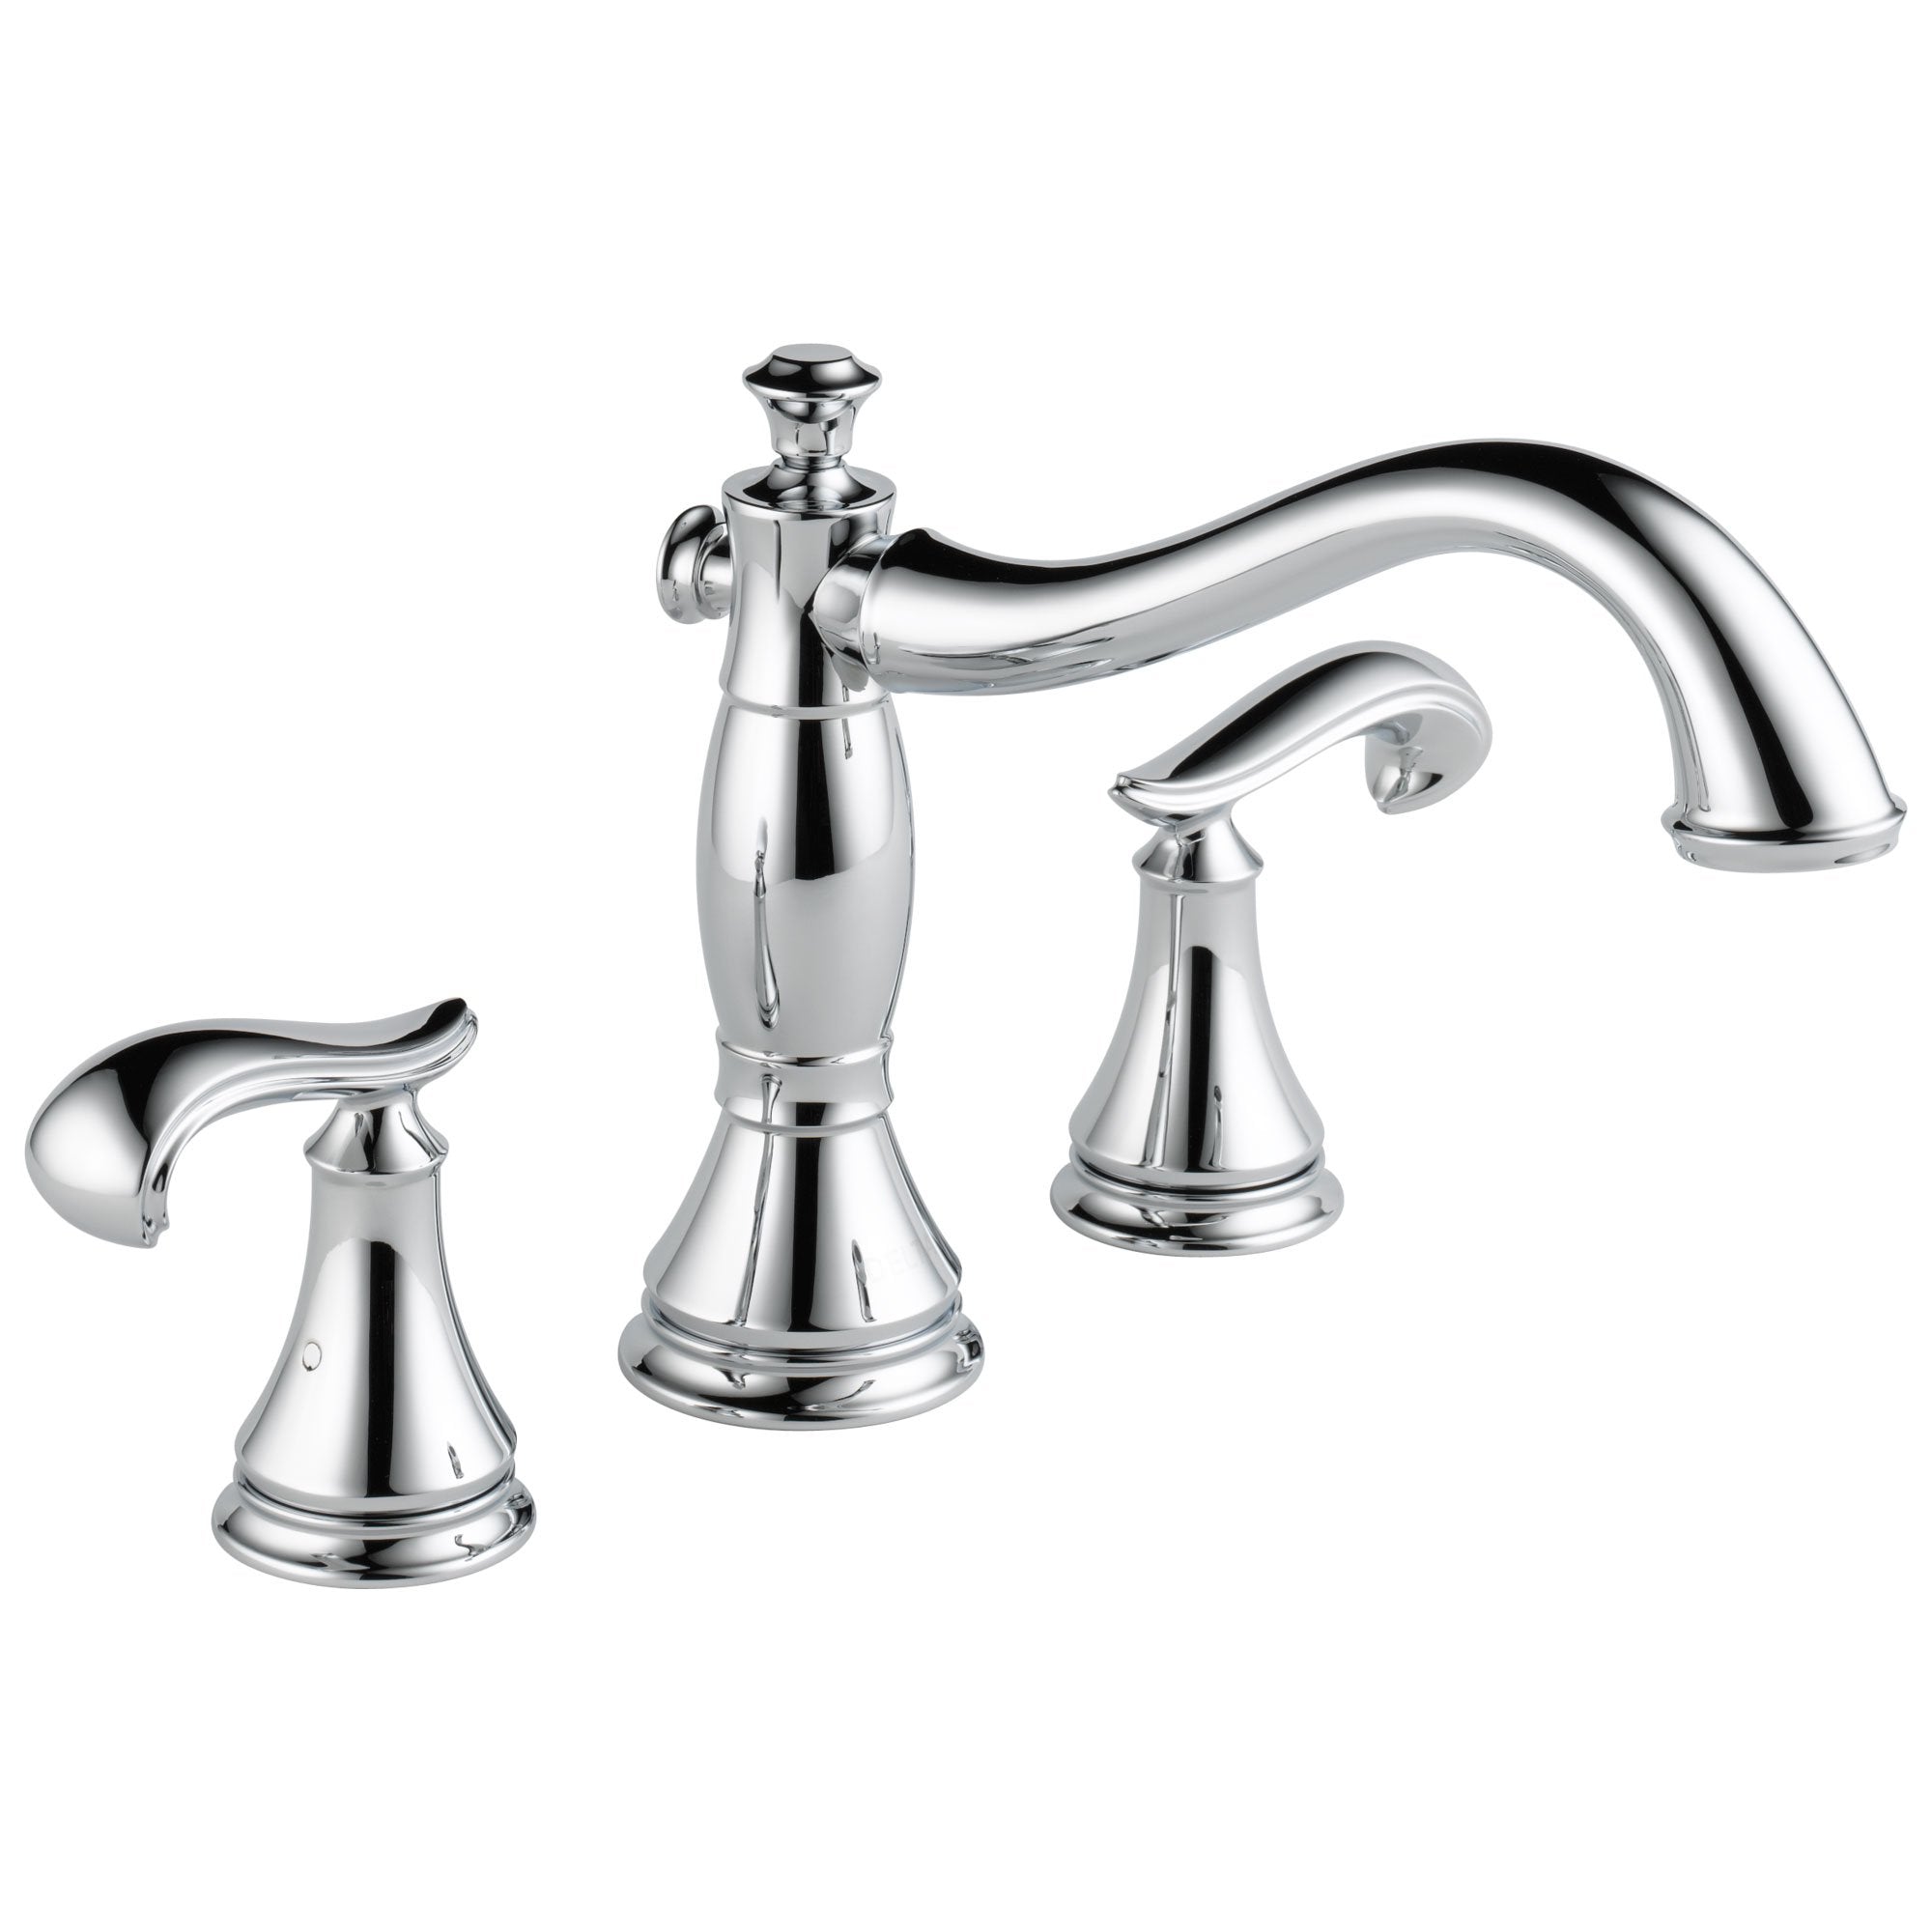 Delta Cassidy Collection Chrome Finish Roman Tub Filler Faucet COMPLETE ITEM Includes (2) French Scroll Levers and Rough-in Valve D1435V